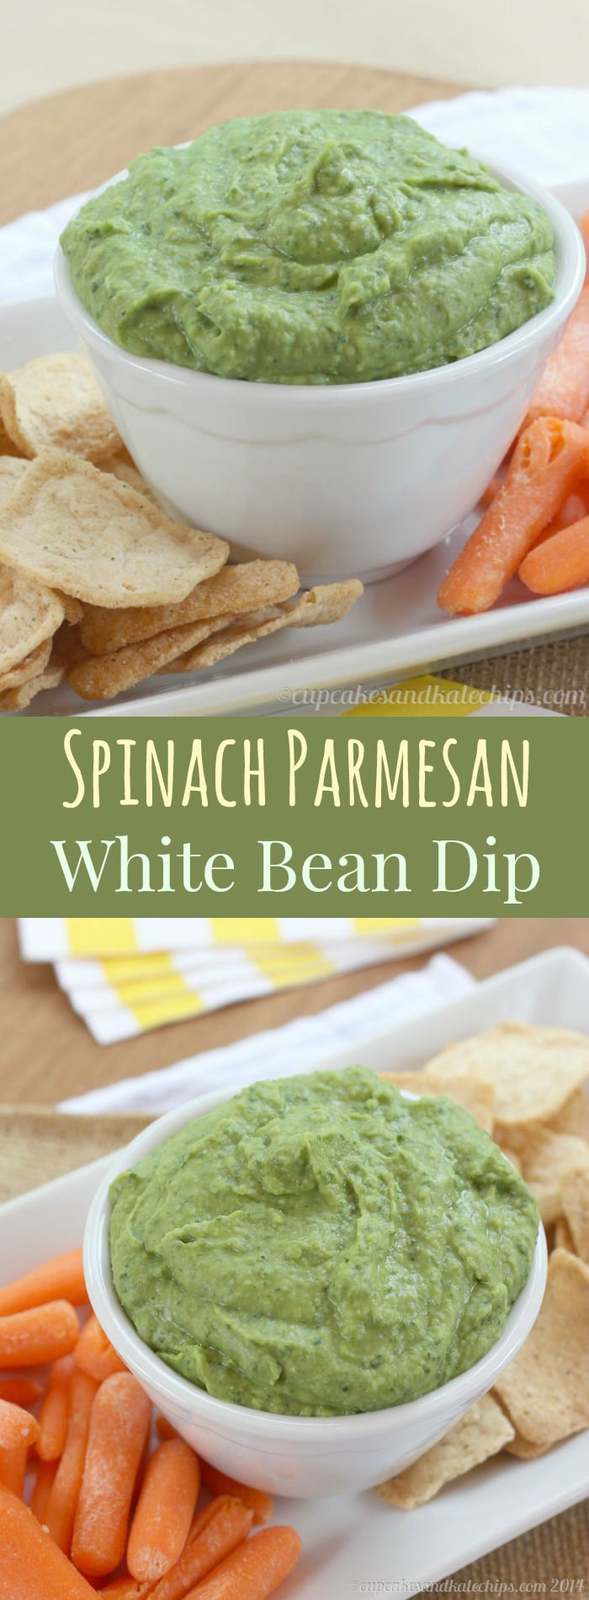 Spinach Parmesan White Bean Dip - a quick and easy five-ingredient recipe for a simple snack or appetizer. 